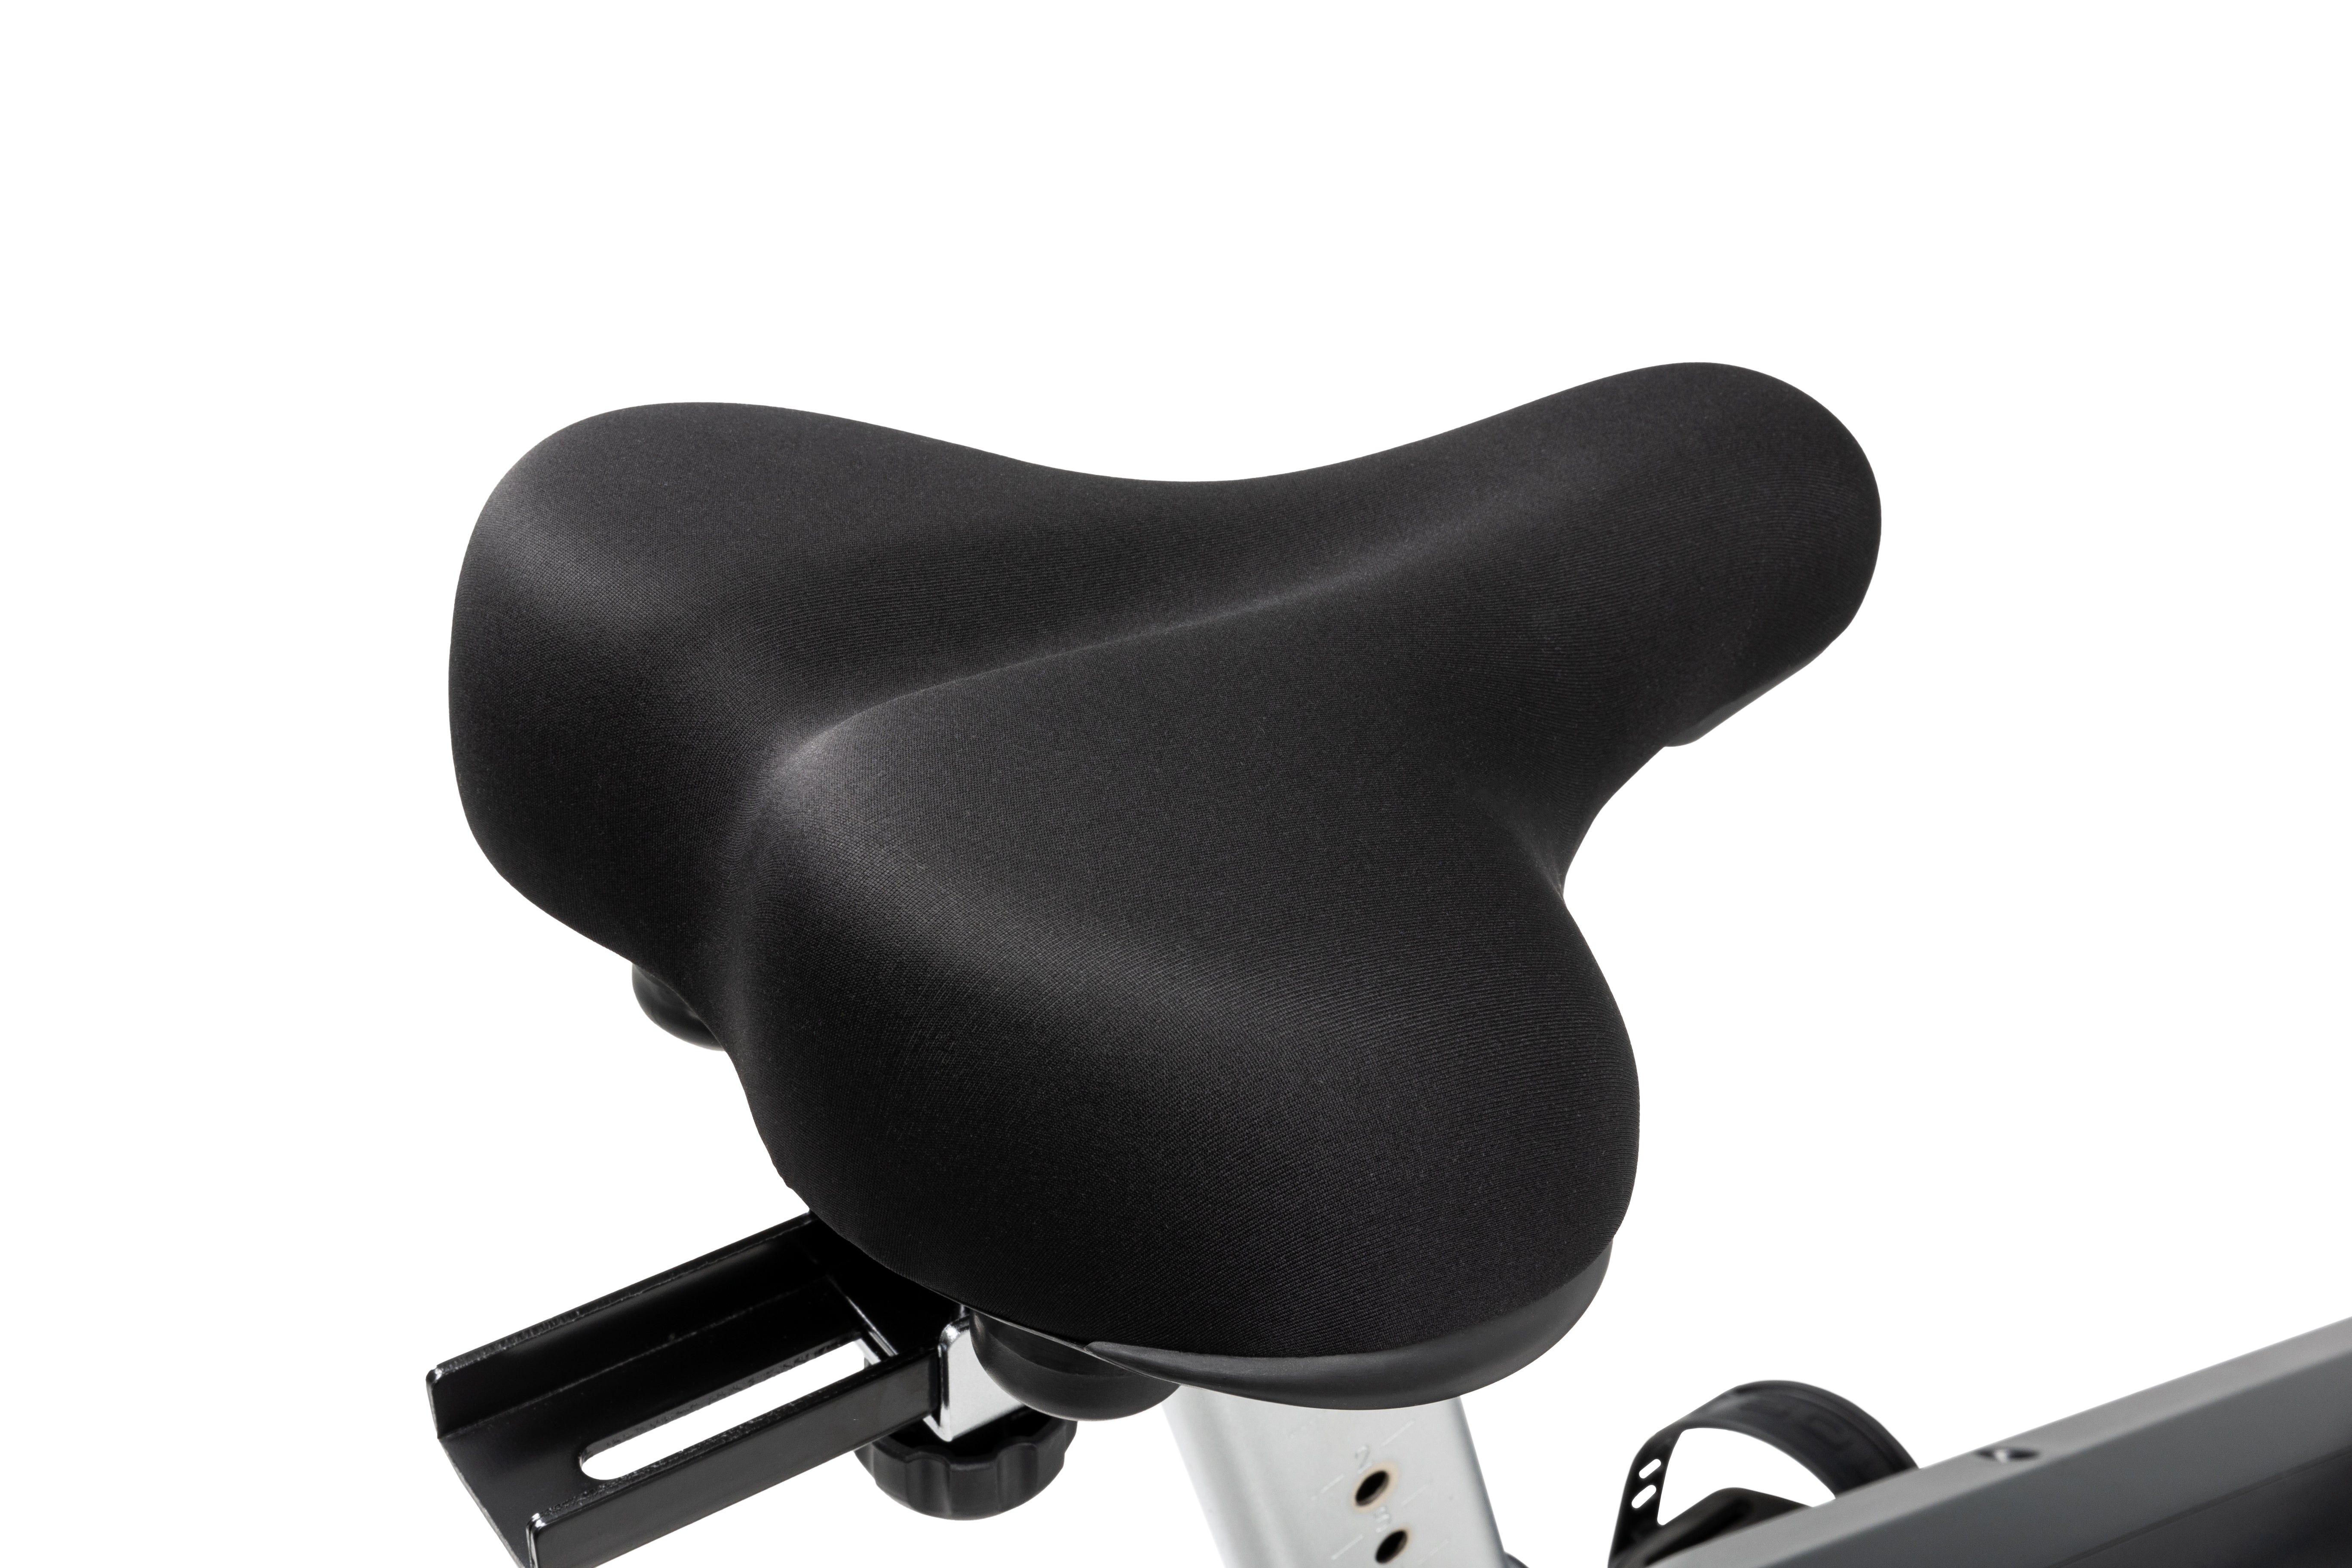 Close-up of the Sole B94 exercise bike's black cushioned seat, highlighting its ergonomic design and the attached adjustable rail.